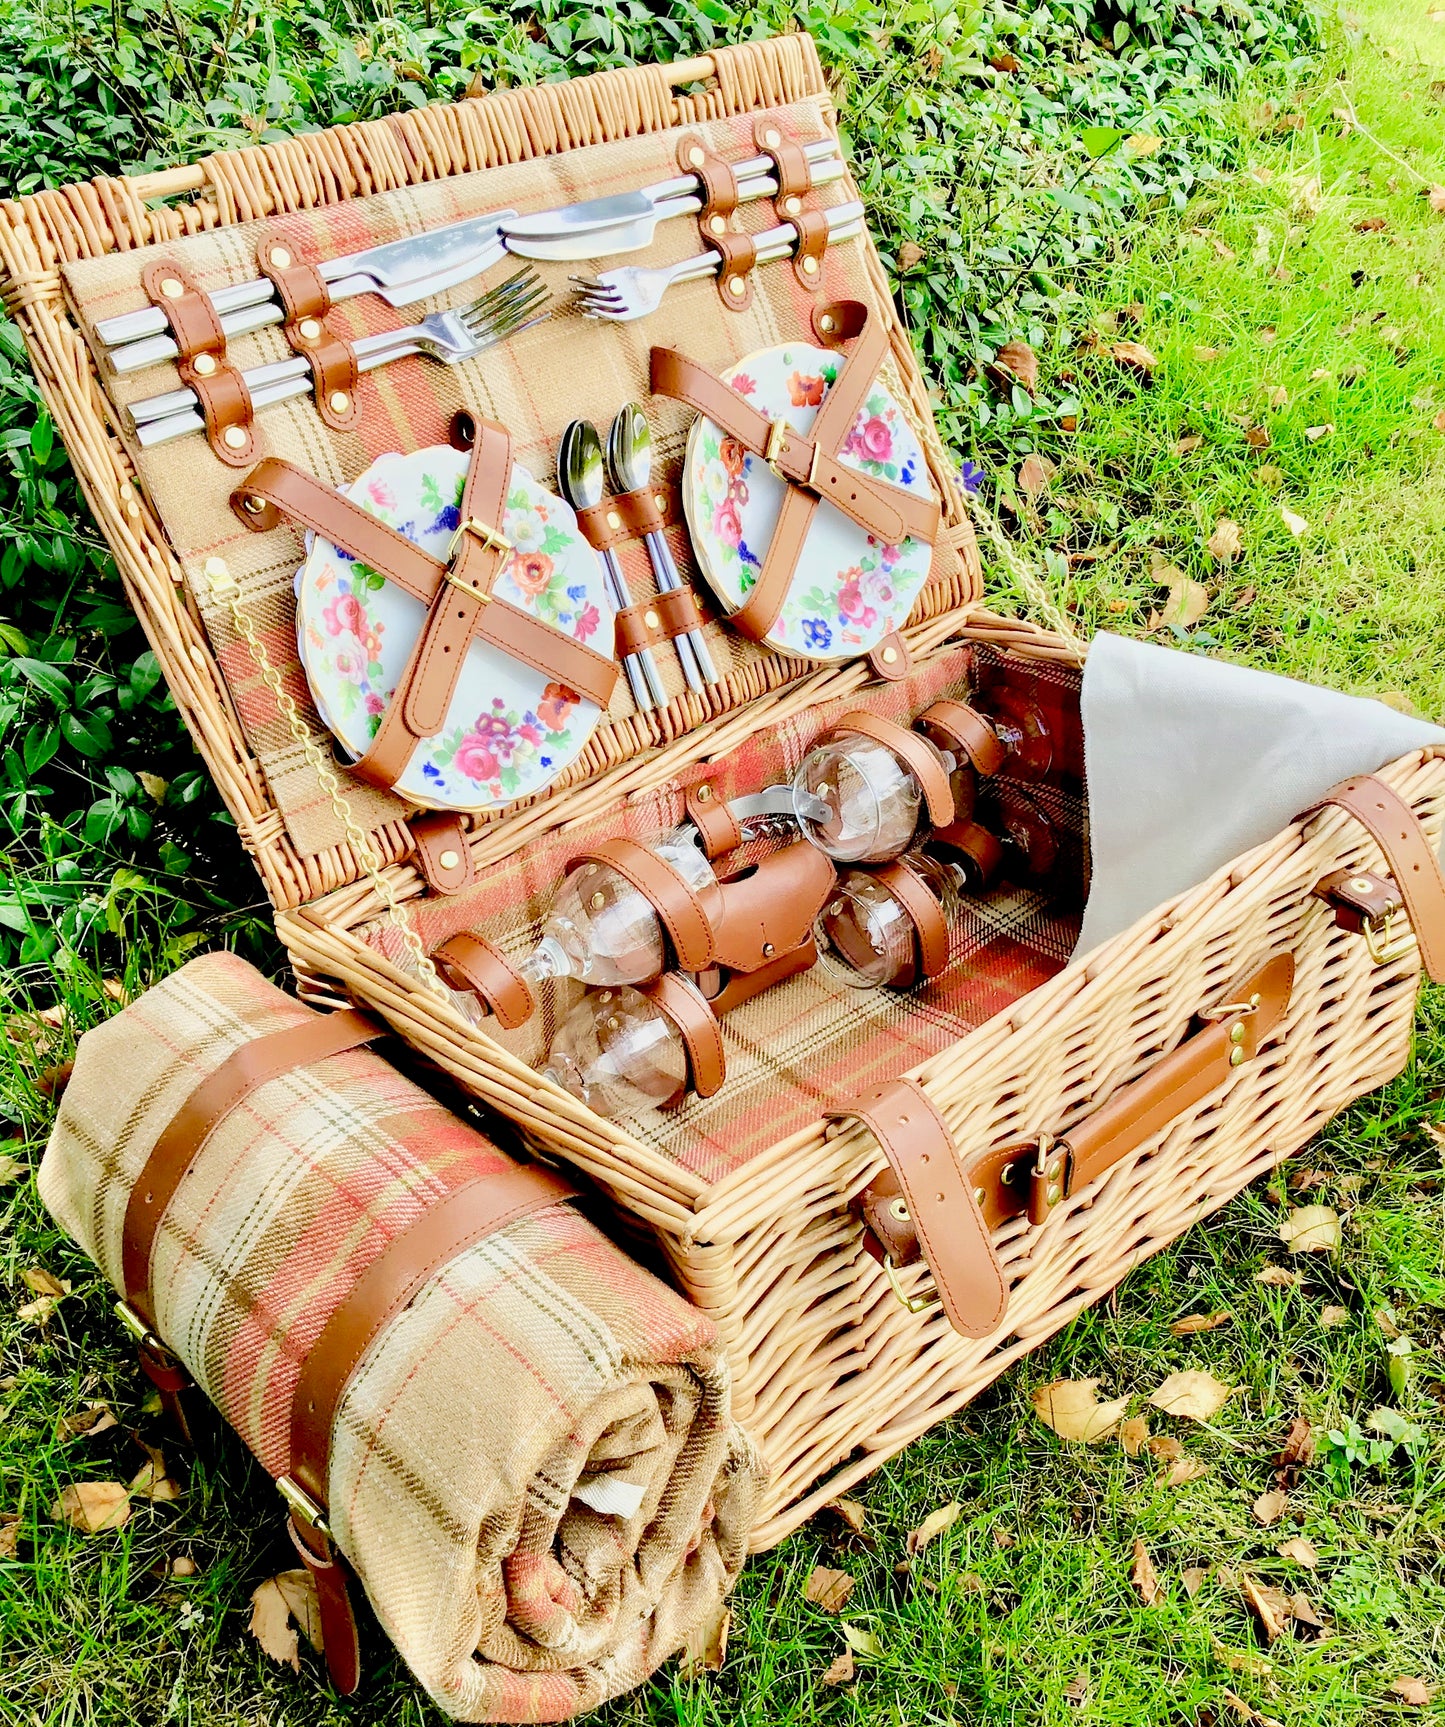 The Grange - a tweed lined willow Picnic Hamper for 4